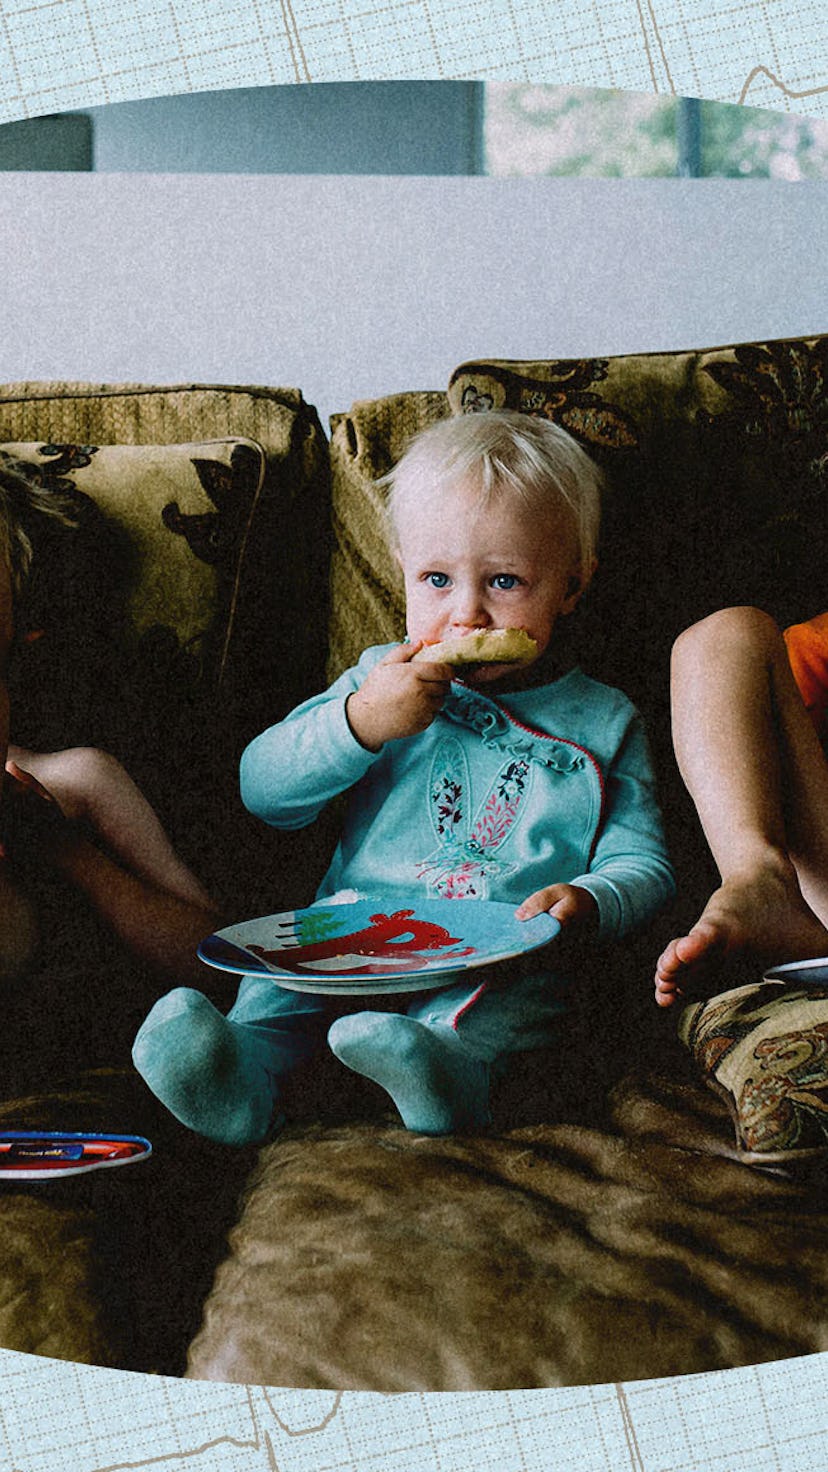 Three children sitting on a couch, eating pizza and watching TV,